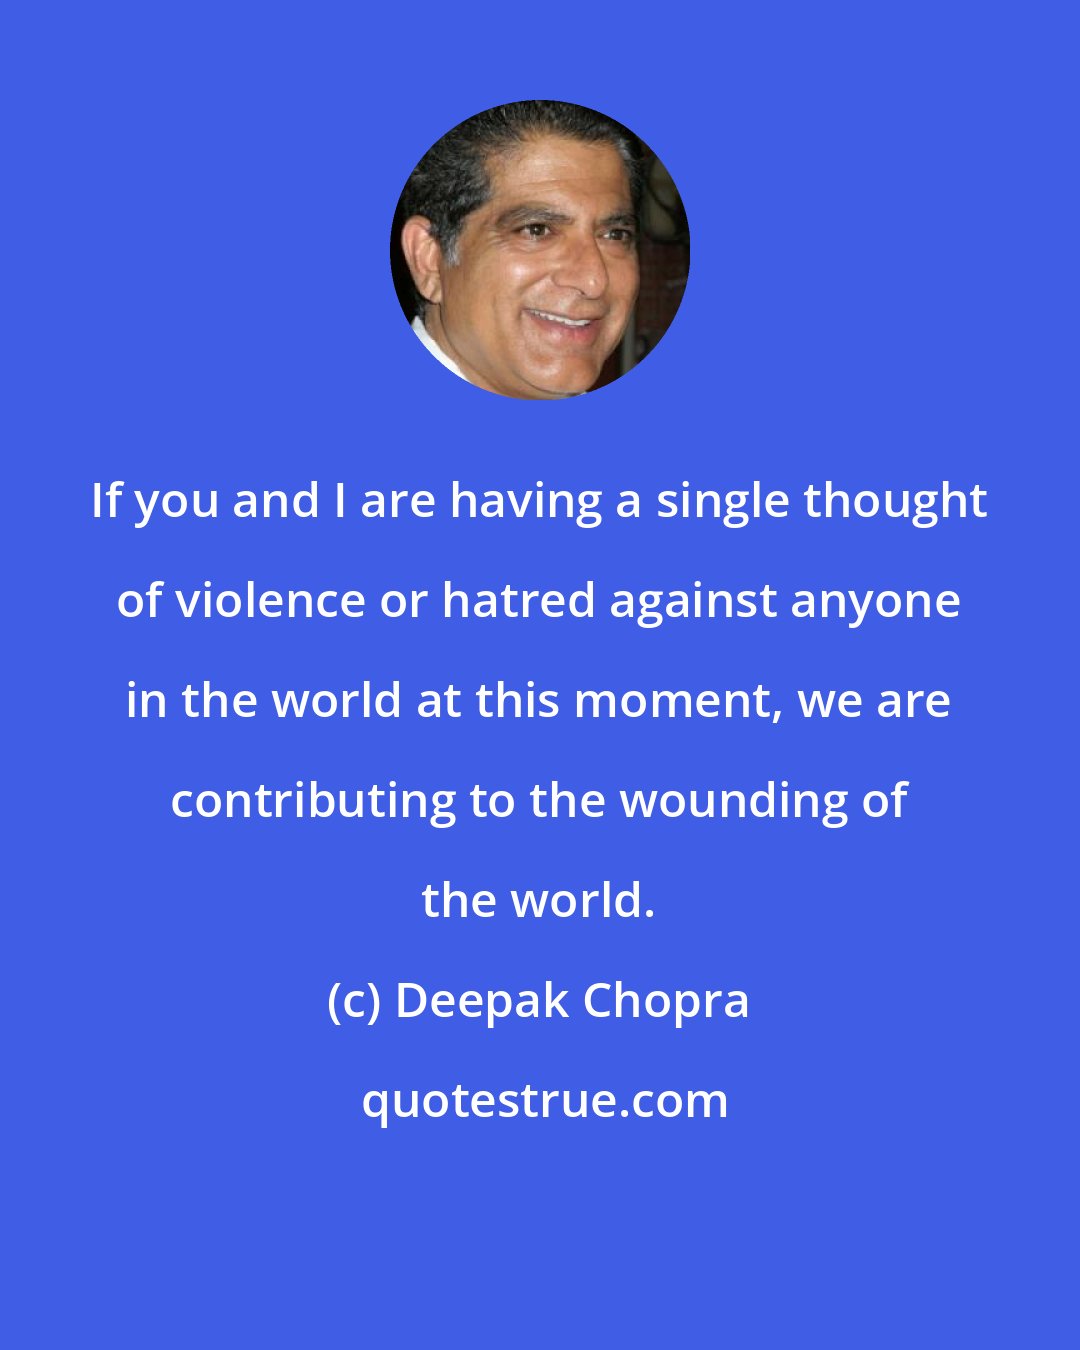 Deepak Chopra: If you and I are having a single thought of violence or hatred against anyone in the world at this moment, we are contributing to the wounding of the world.